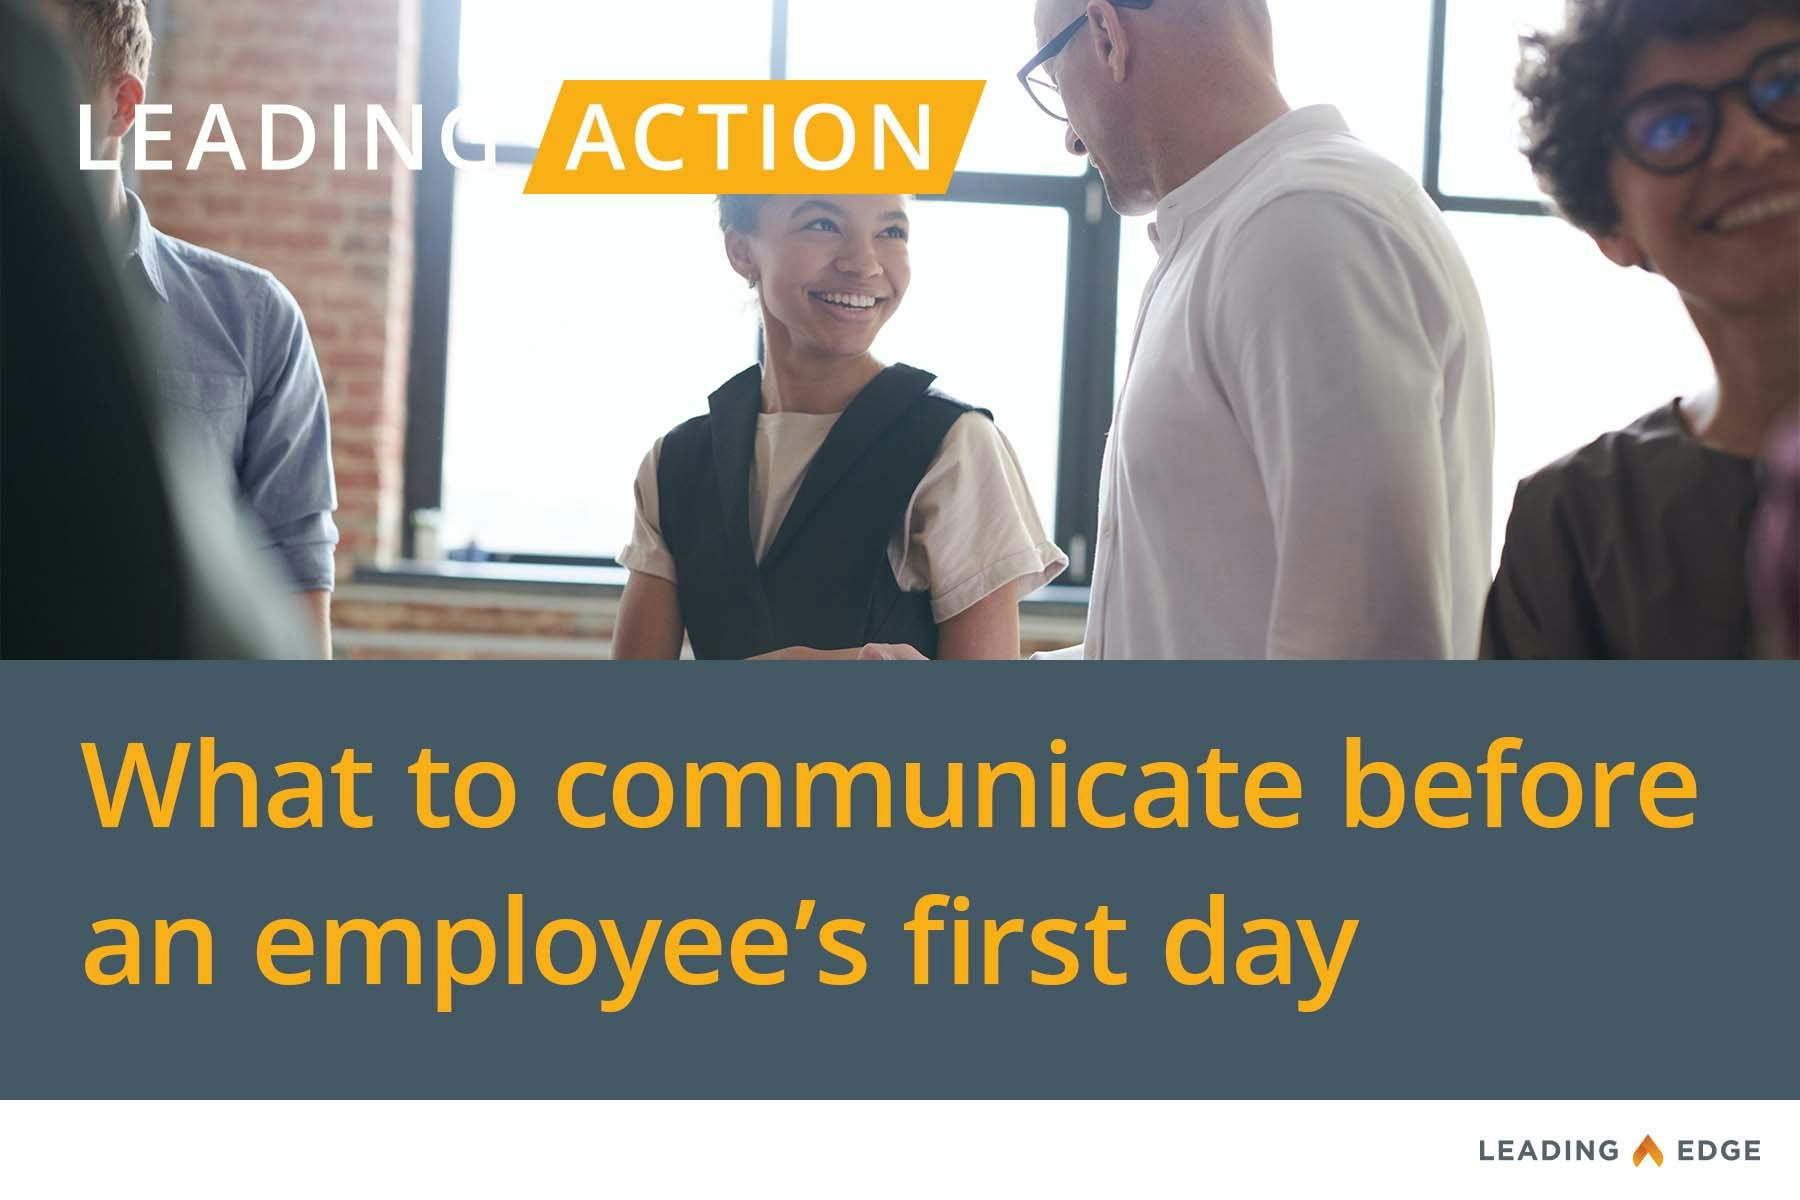 Leading Action: What to communicate before an employee's first day